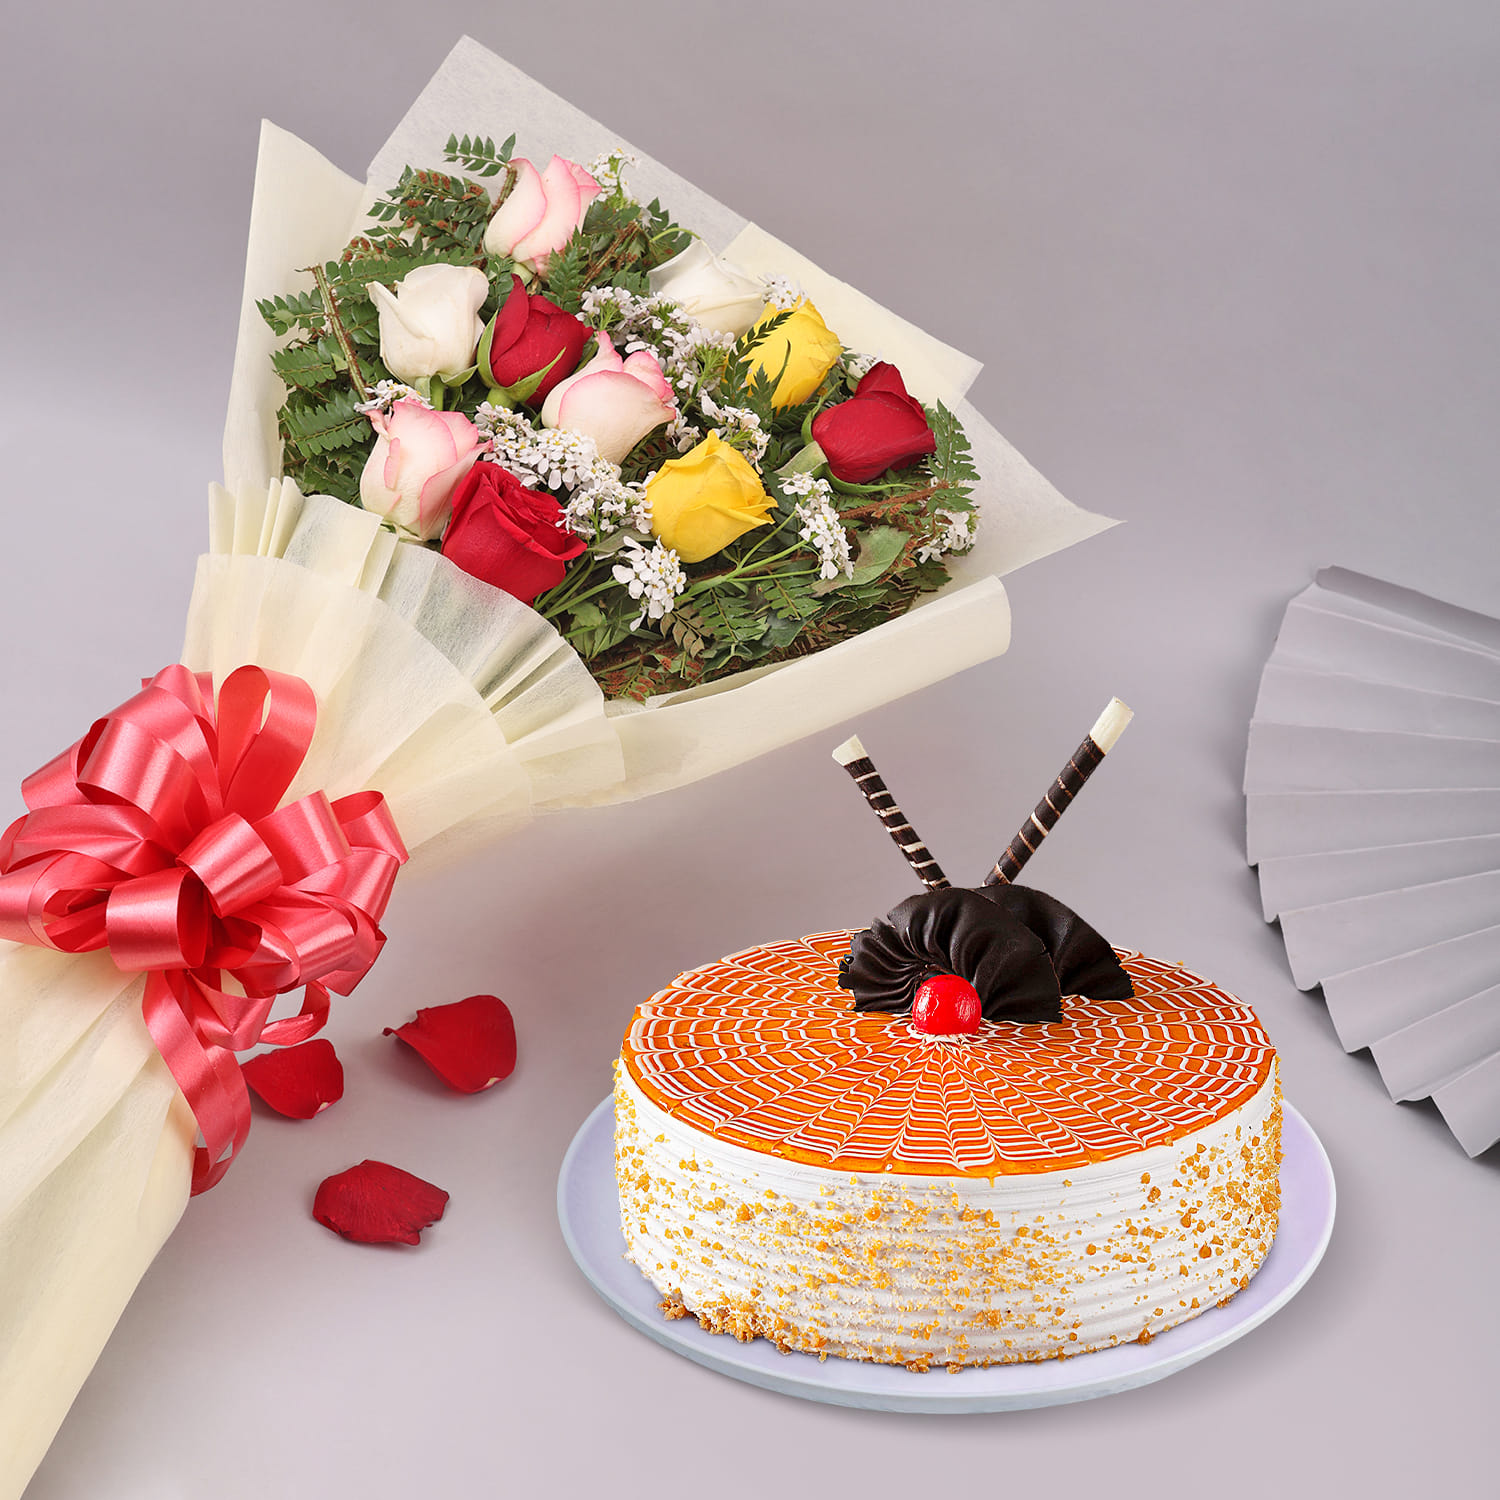 Sending delicious cake with chocolates teddy n flowers for birthday to  Delhi, Same Day Delivery - DelhiOnlineFlorists